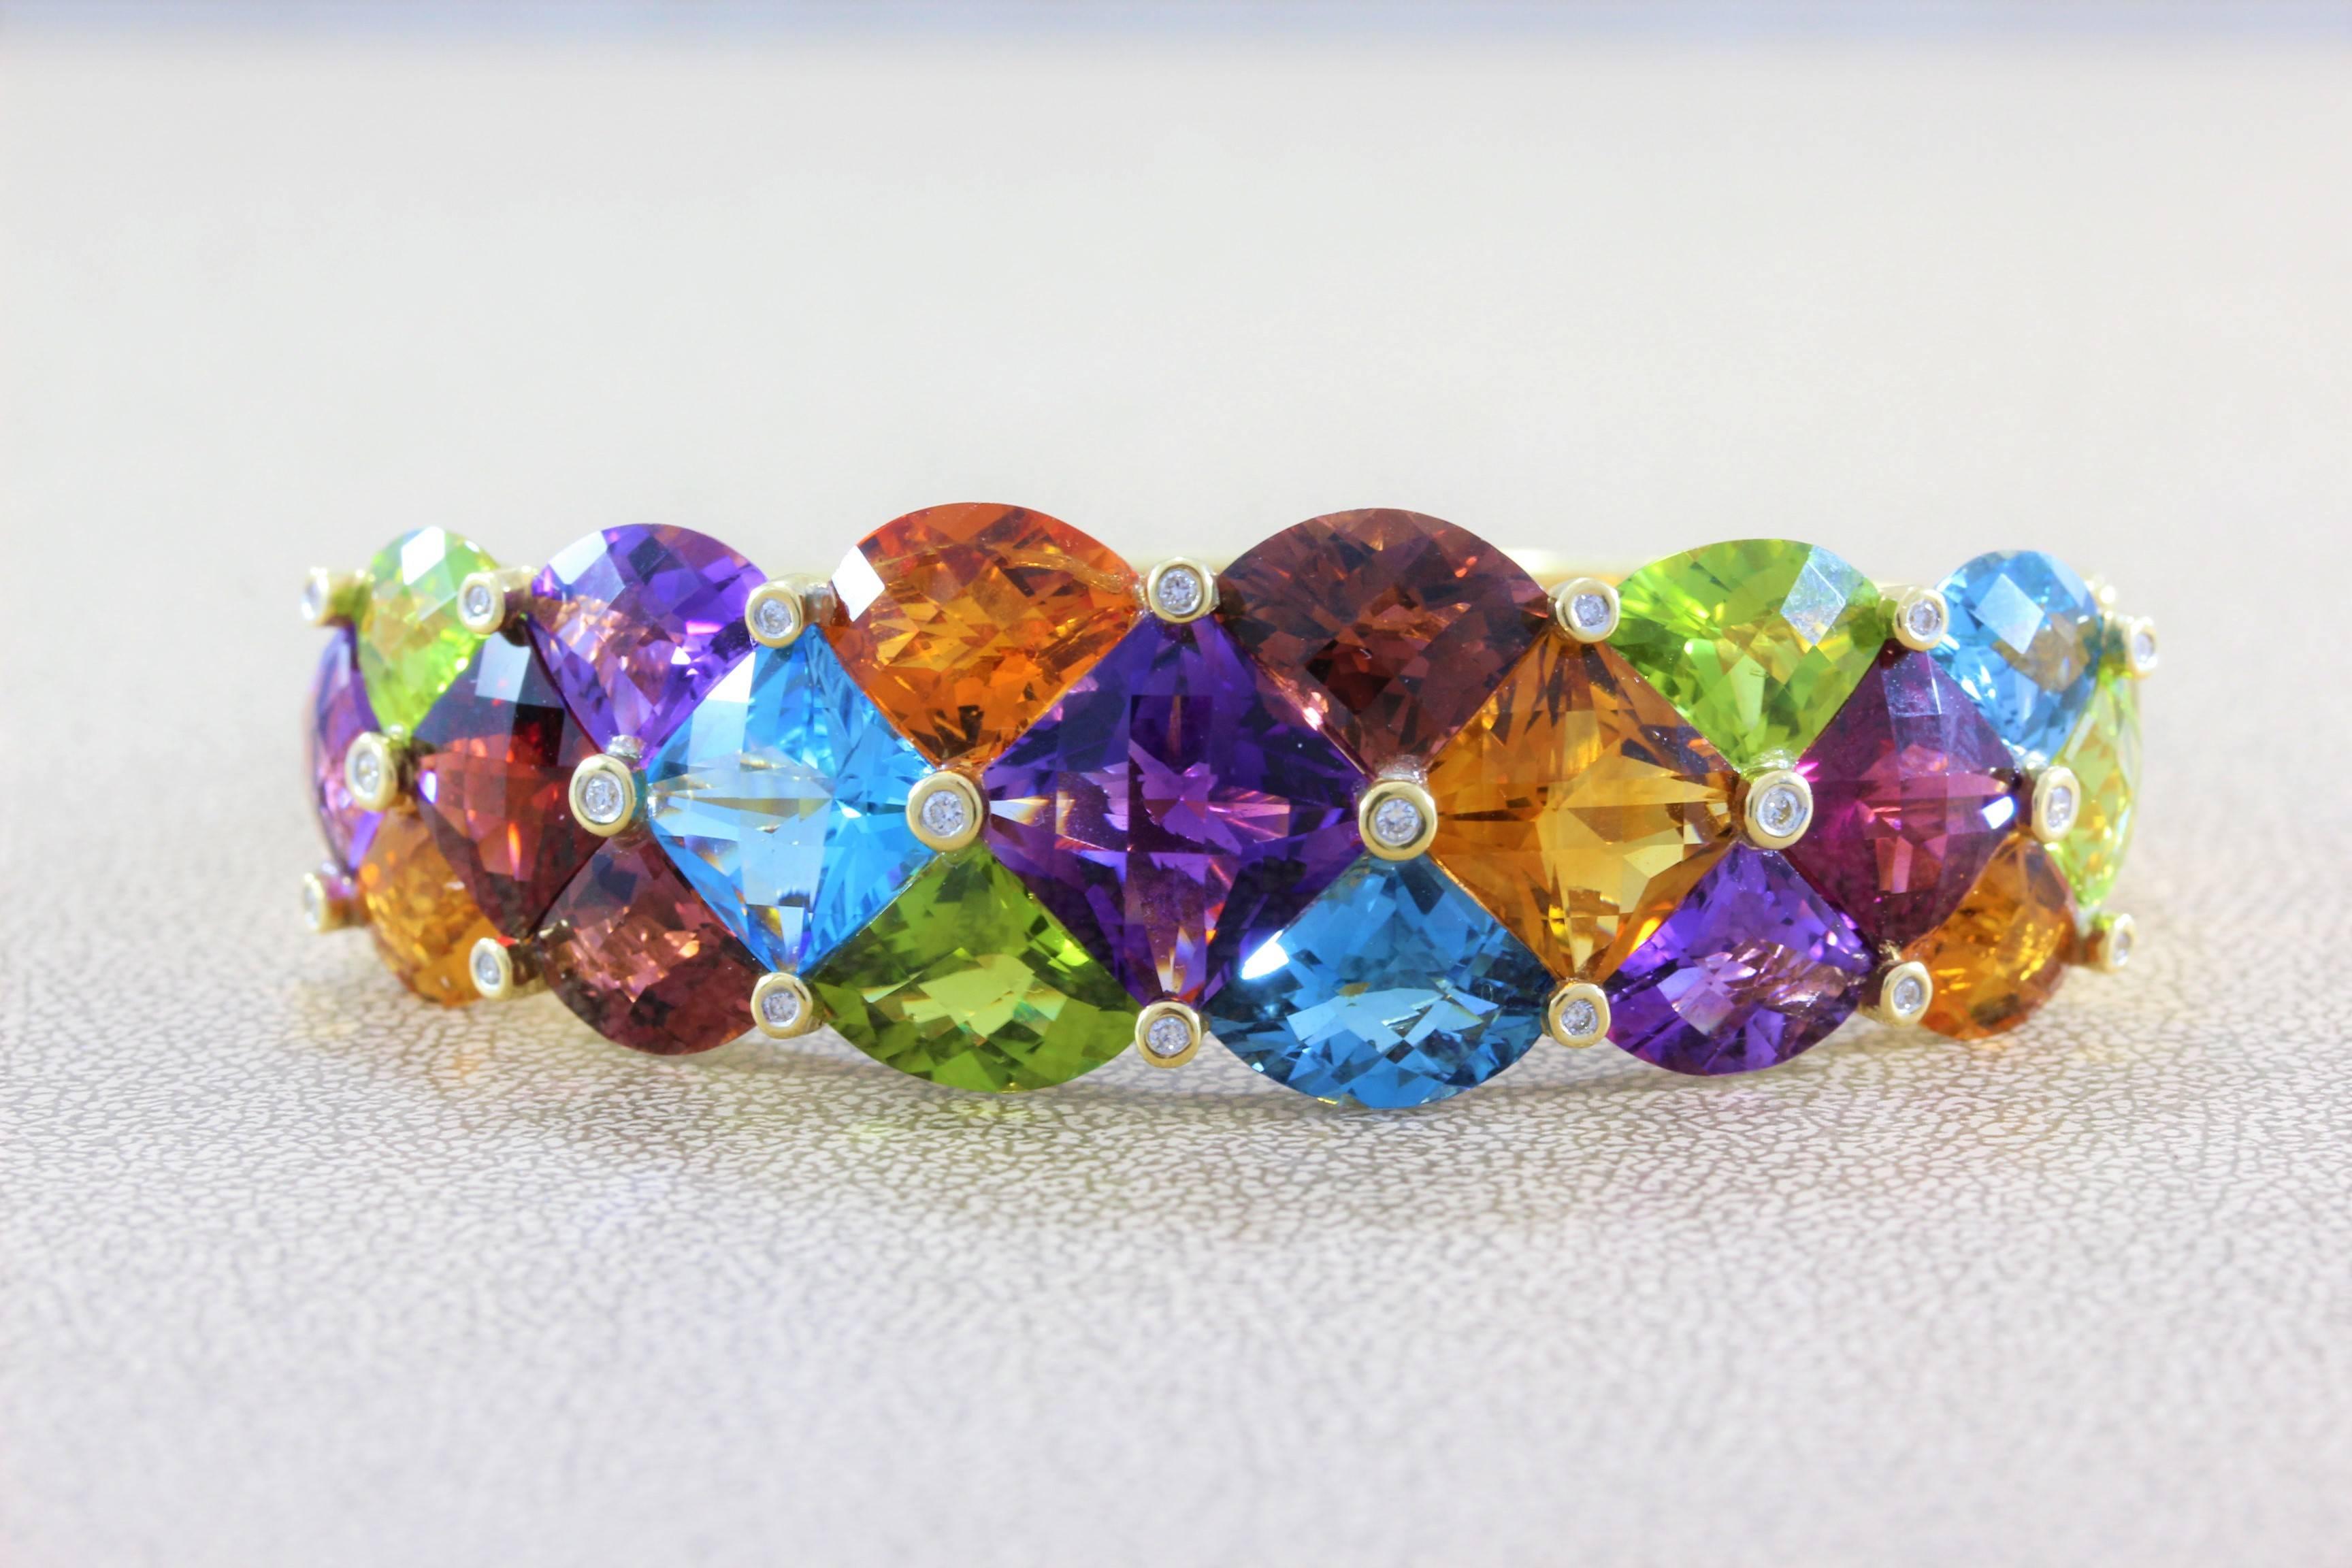 A Bellarri original this bracelet features over 40 carats of multi colored gemstones including peridot, amethyst, garnet, citrine and topaz. Accenting the colored stones are 0.36 carats of diamond, all set in 18K yellow gold. 

Size 6.5 inches  
